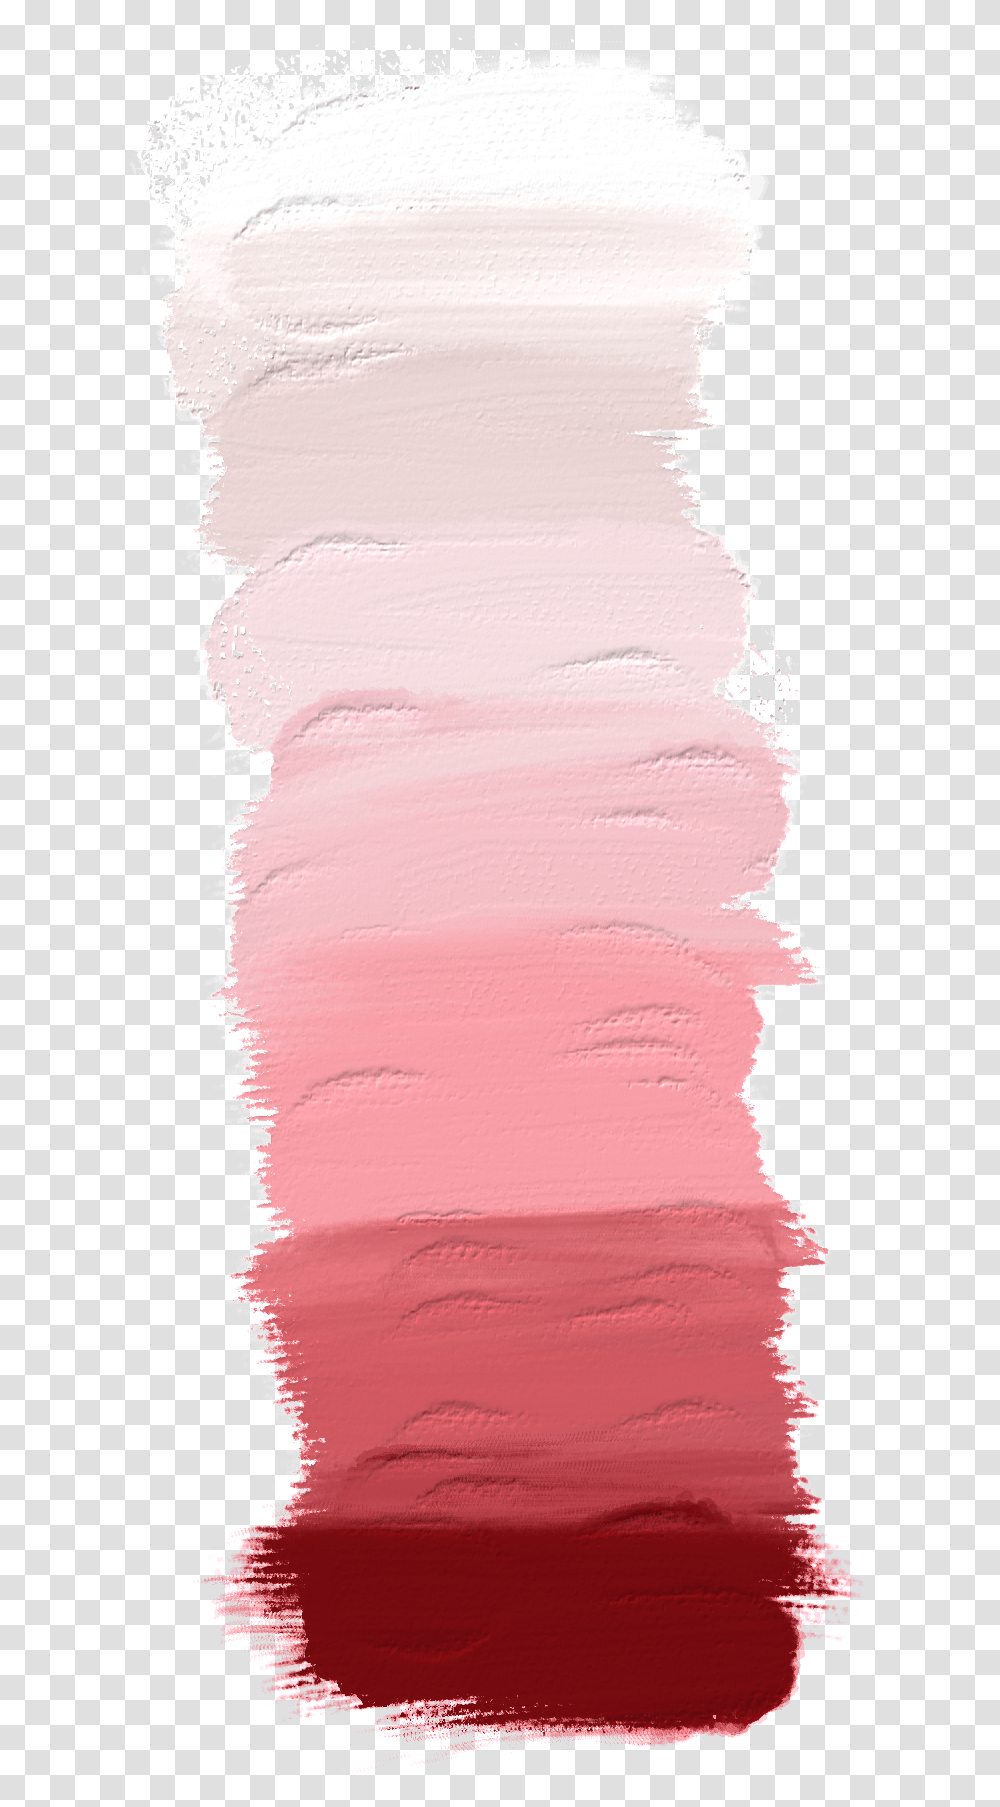 Brush Stroke Dry Mix Palette Pink Gradient Overlay, Cream, Dessert, Food, Outdoors Transparent Png